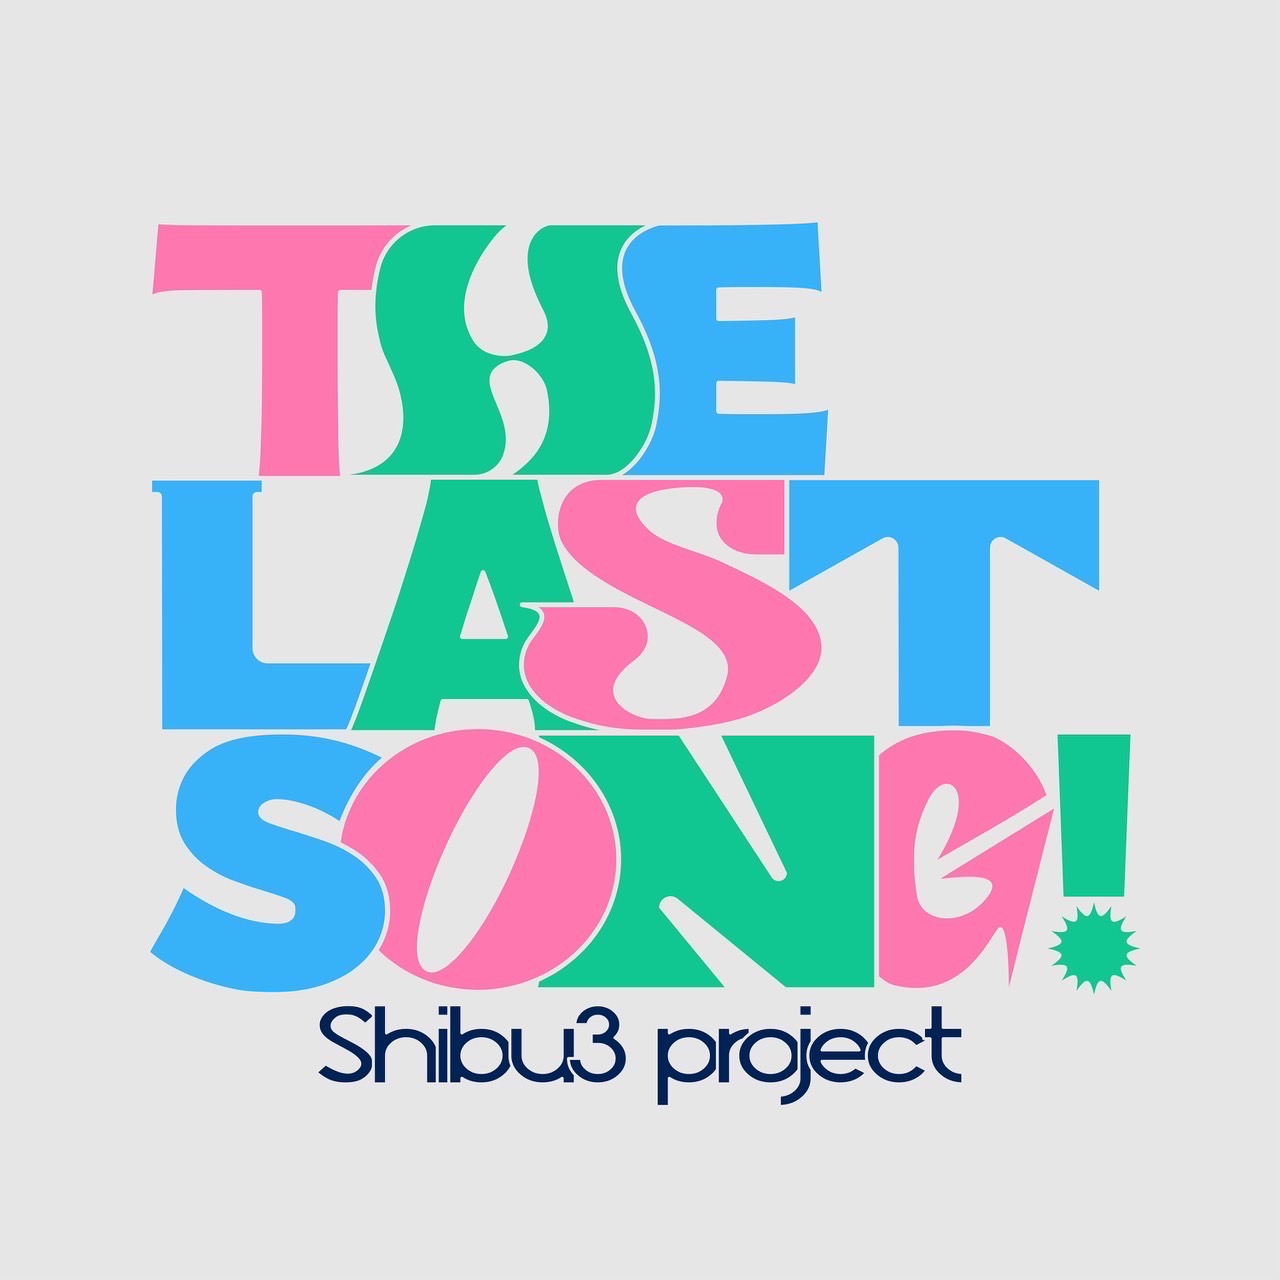 『THE LAST SONG!』配信開始！！